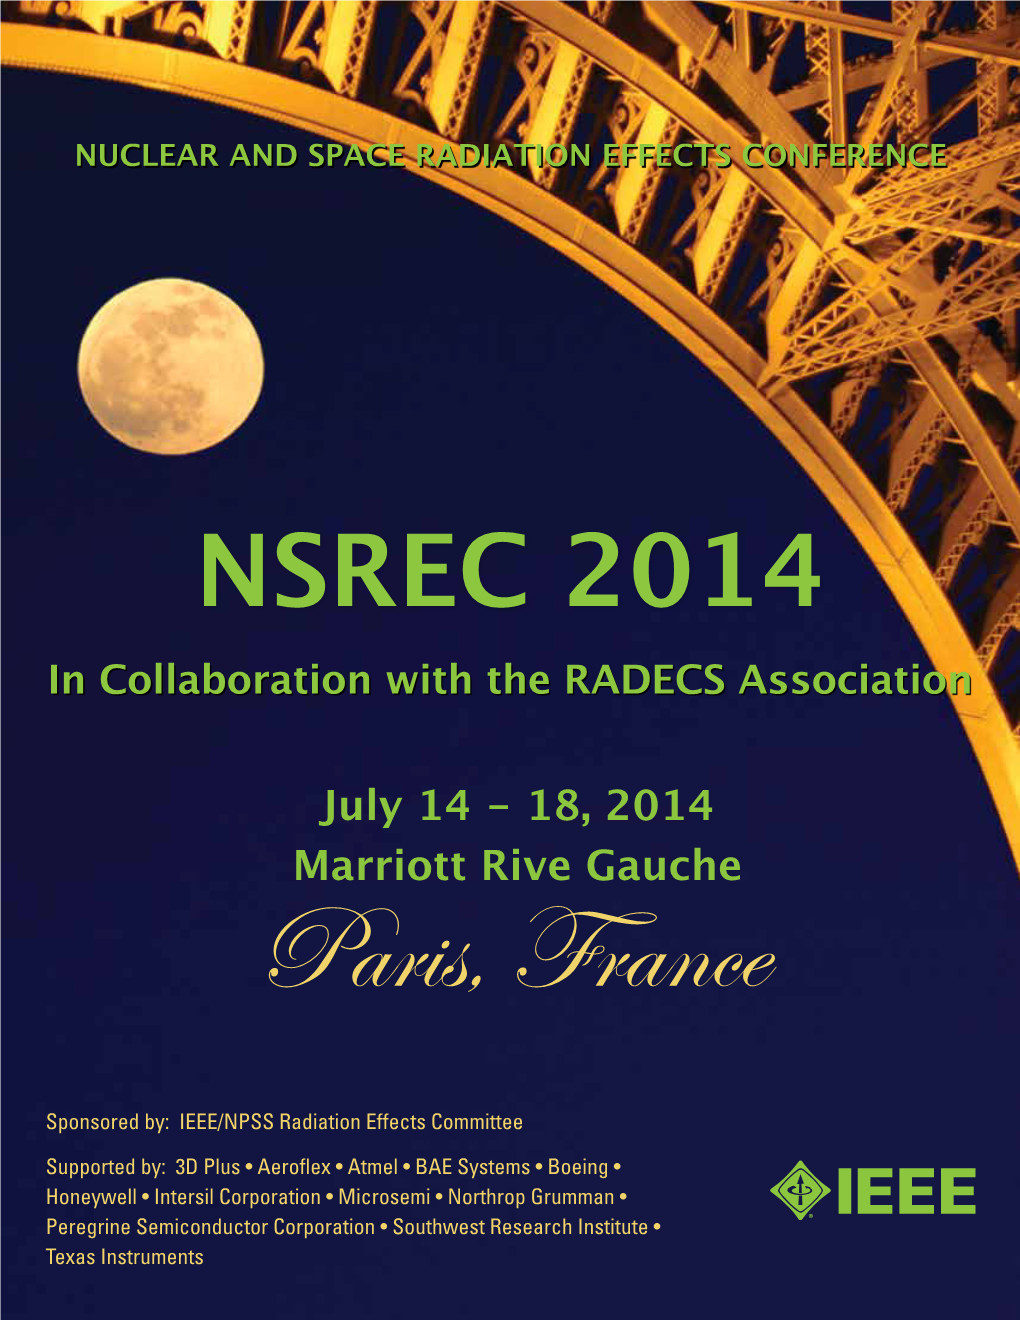 NSREC 2014 in Collaboration with the RADECS Association